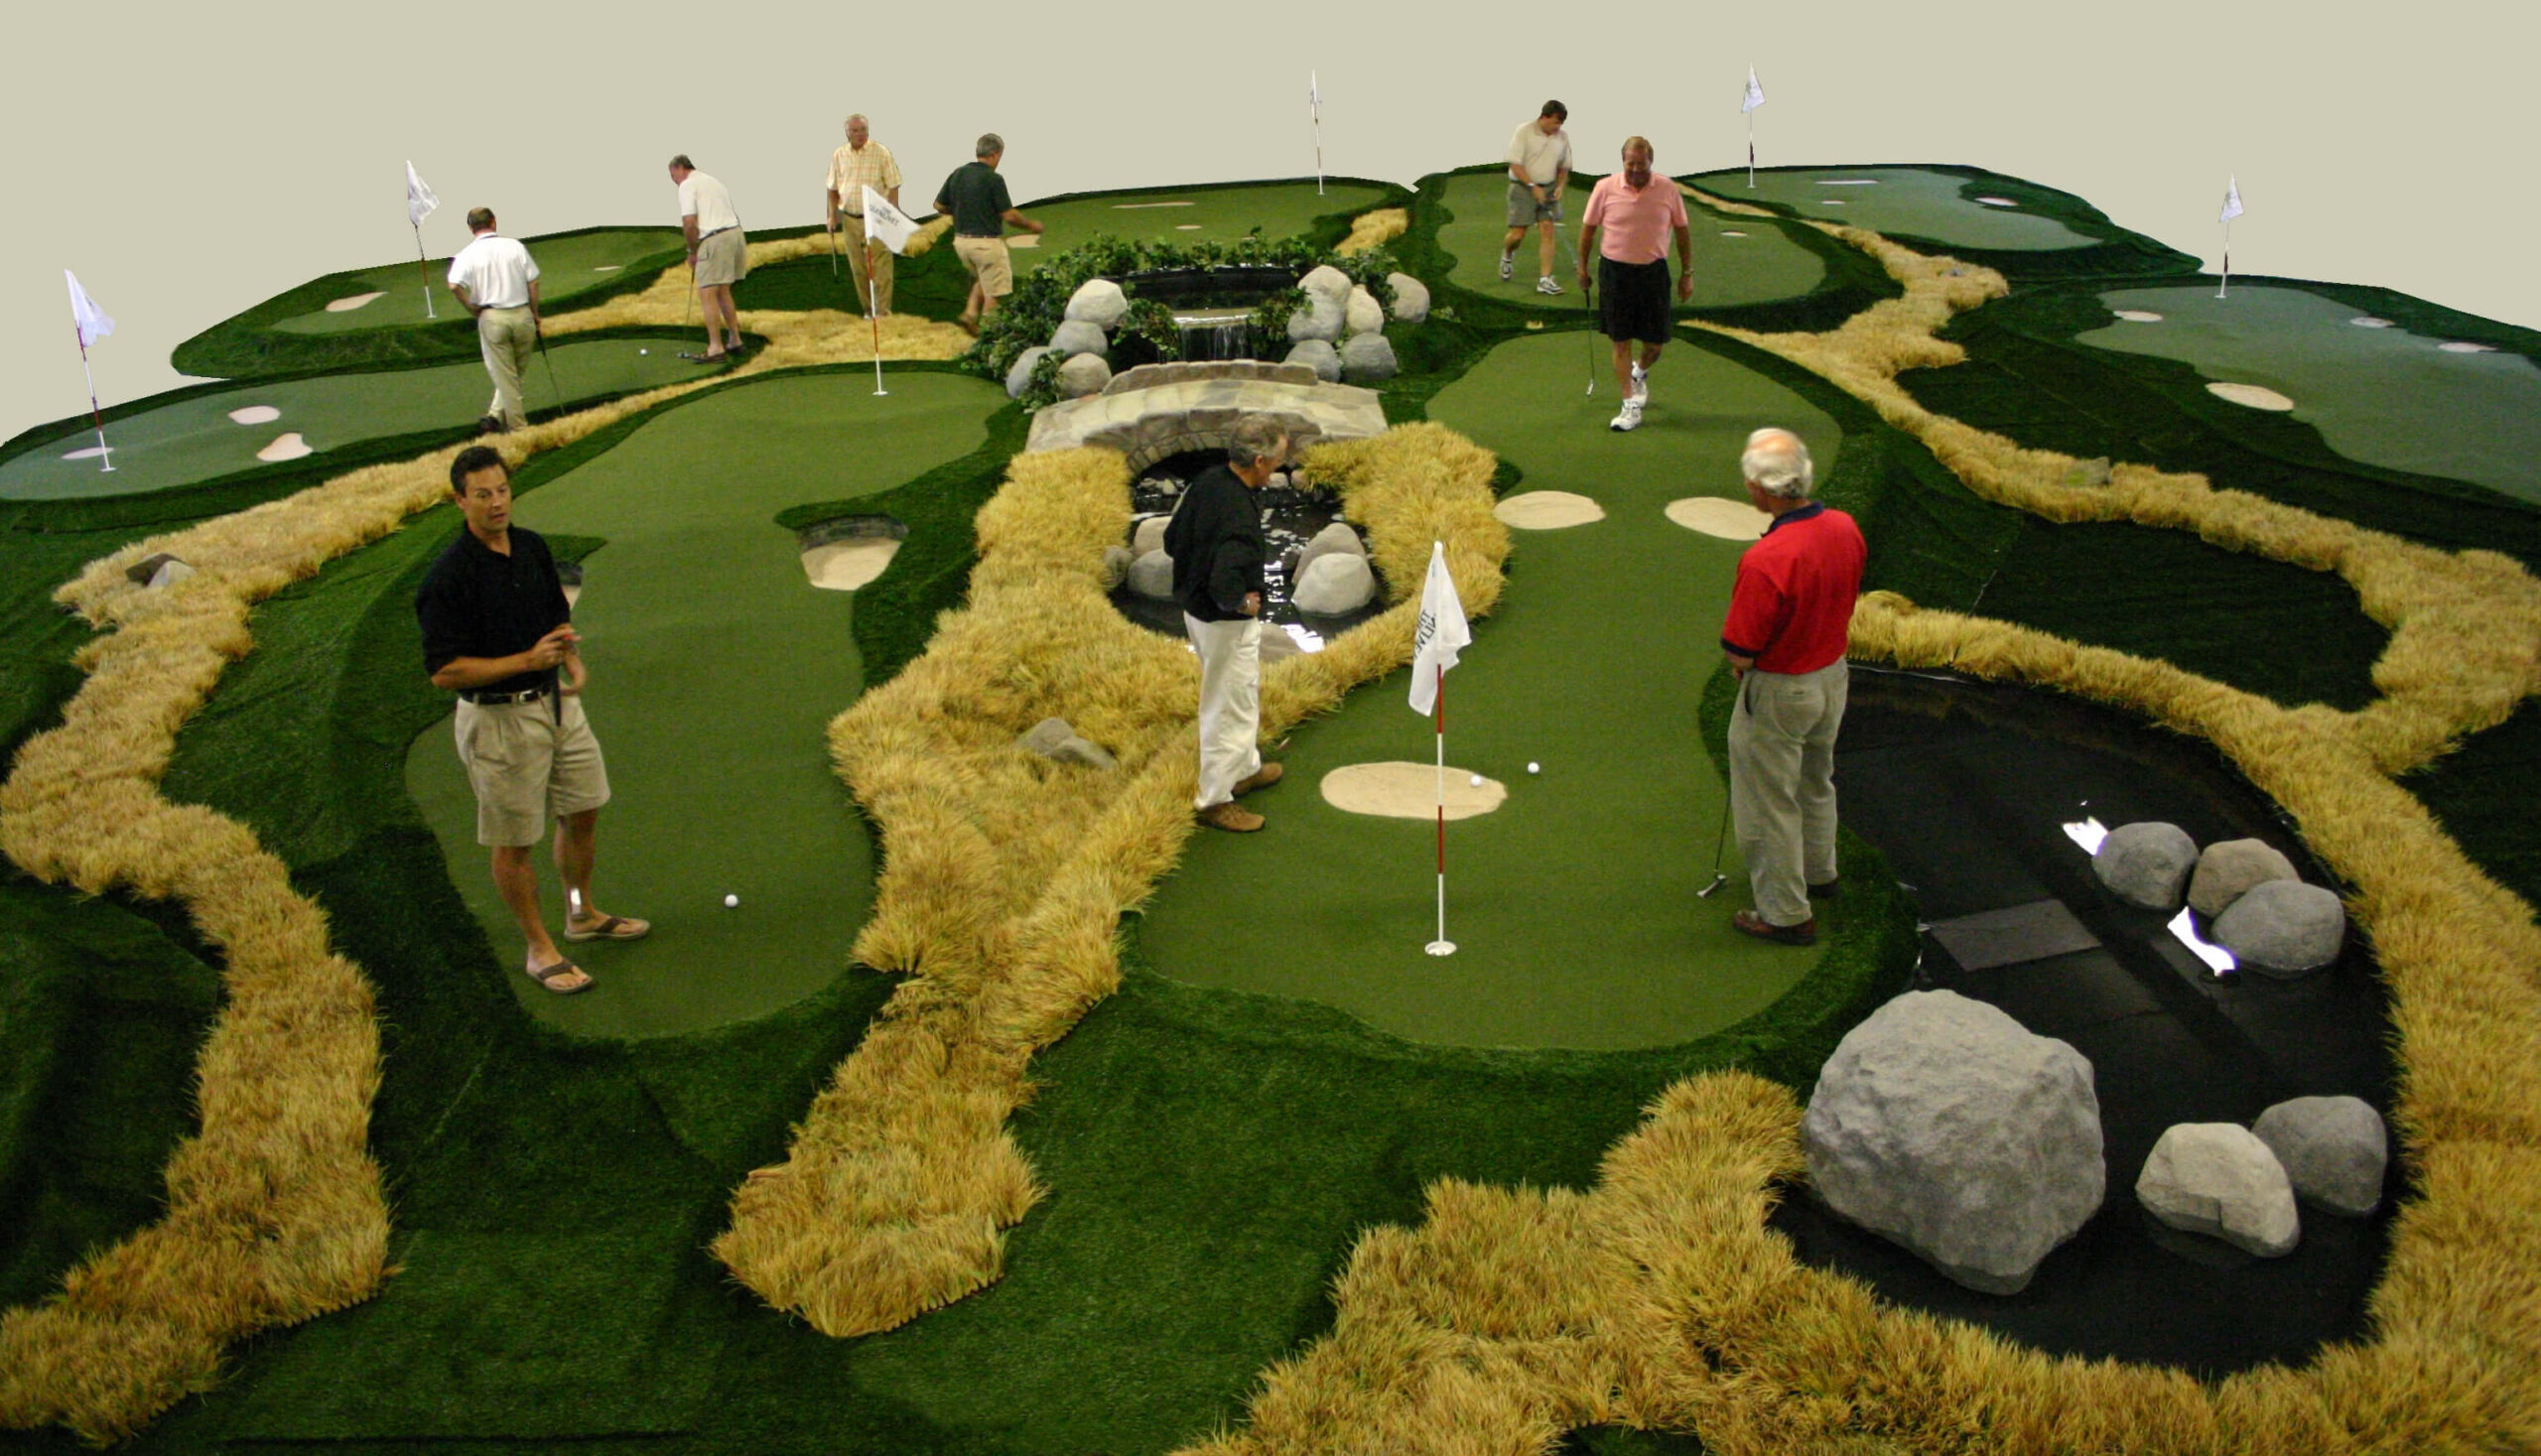 Players on an AGS portable modular mini golf course Glenlivet used as attraction at tasting events